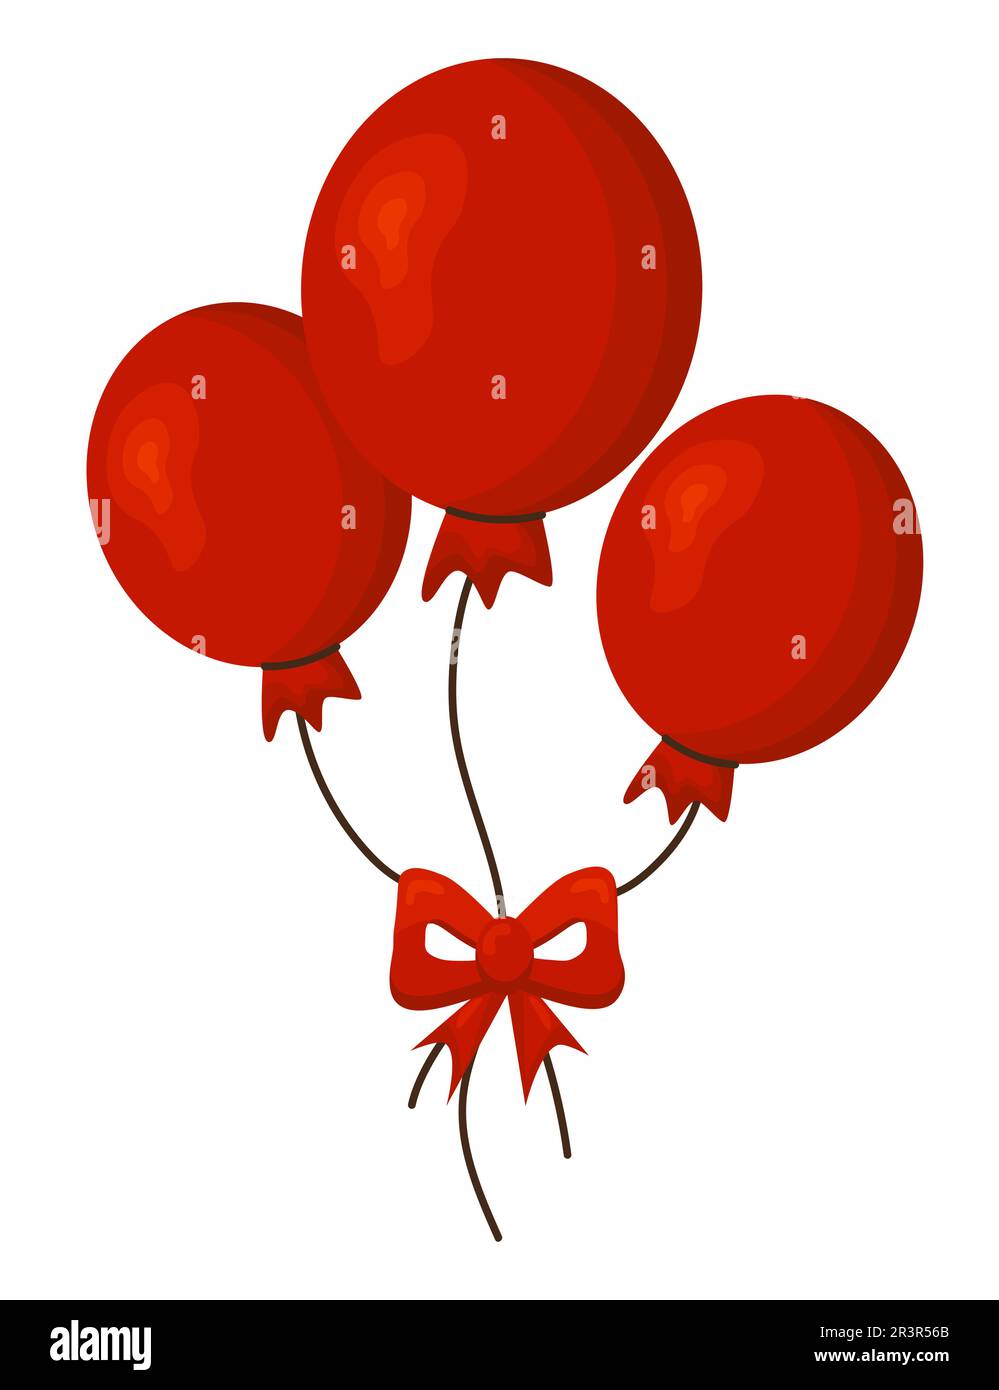 Bunch of balloons string Stock Vector Images - Alamy